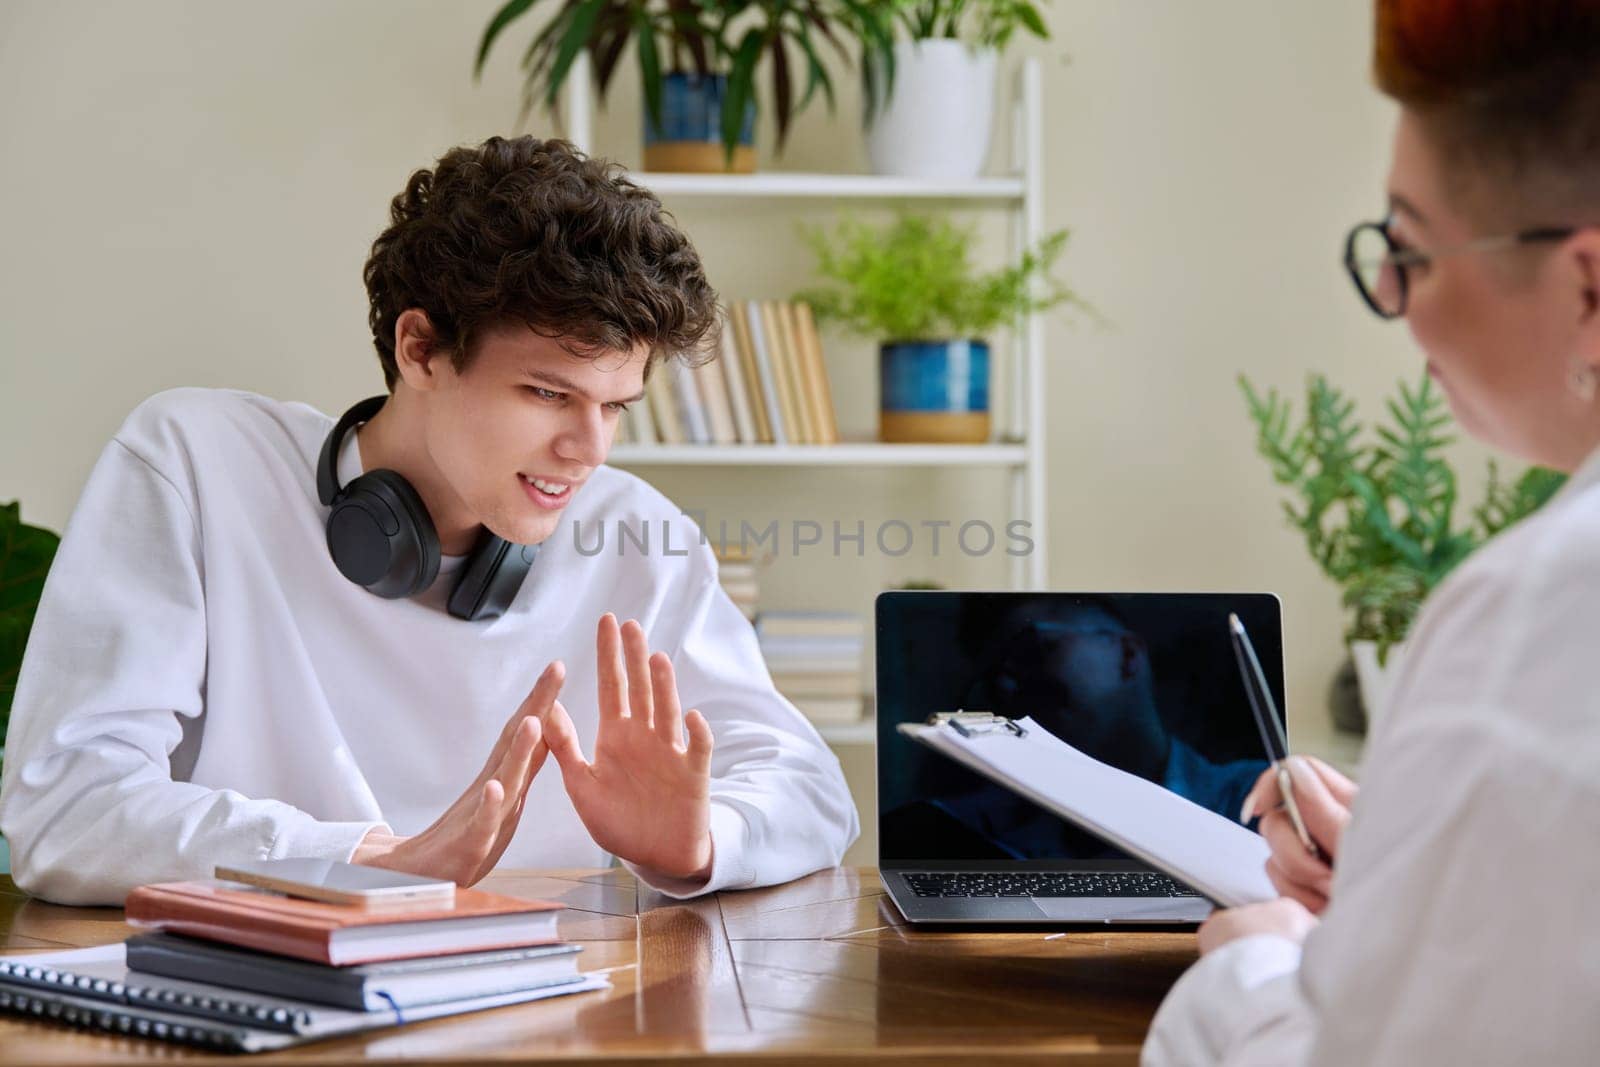 Young man university college student at meeting with female professional mental therapist, social worker, counselor, behavior. Psychology therapy help counseling treatment support, mental health